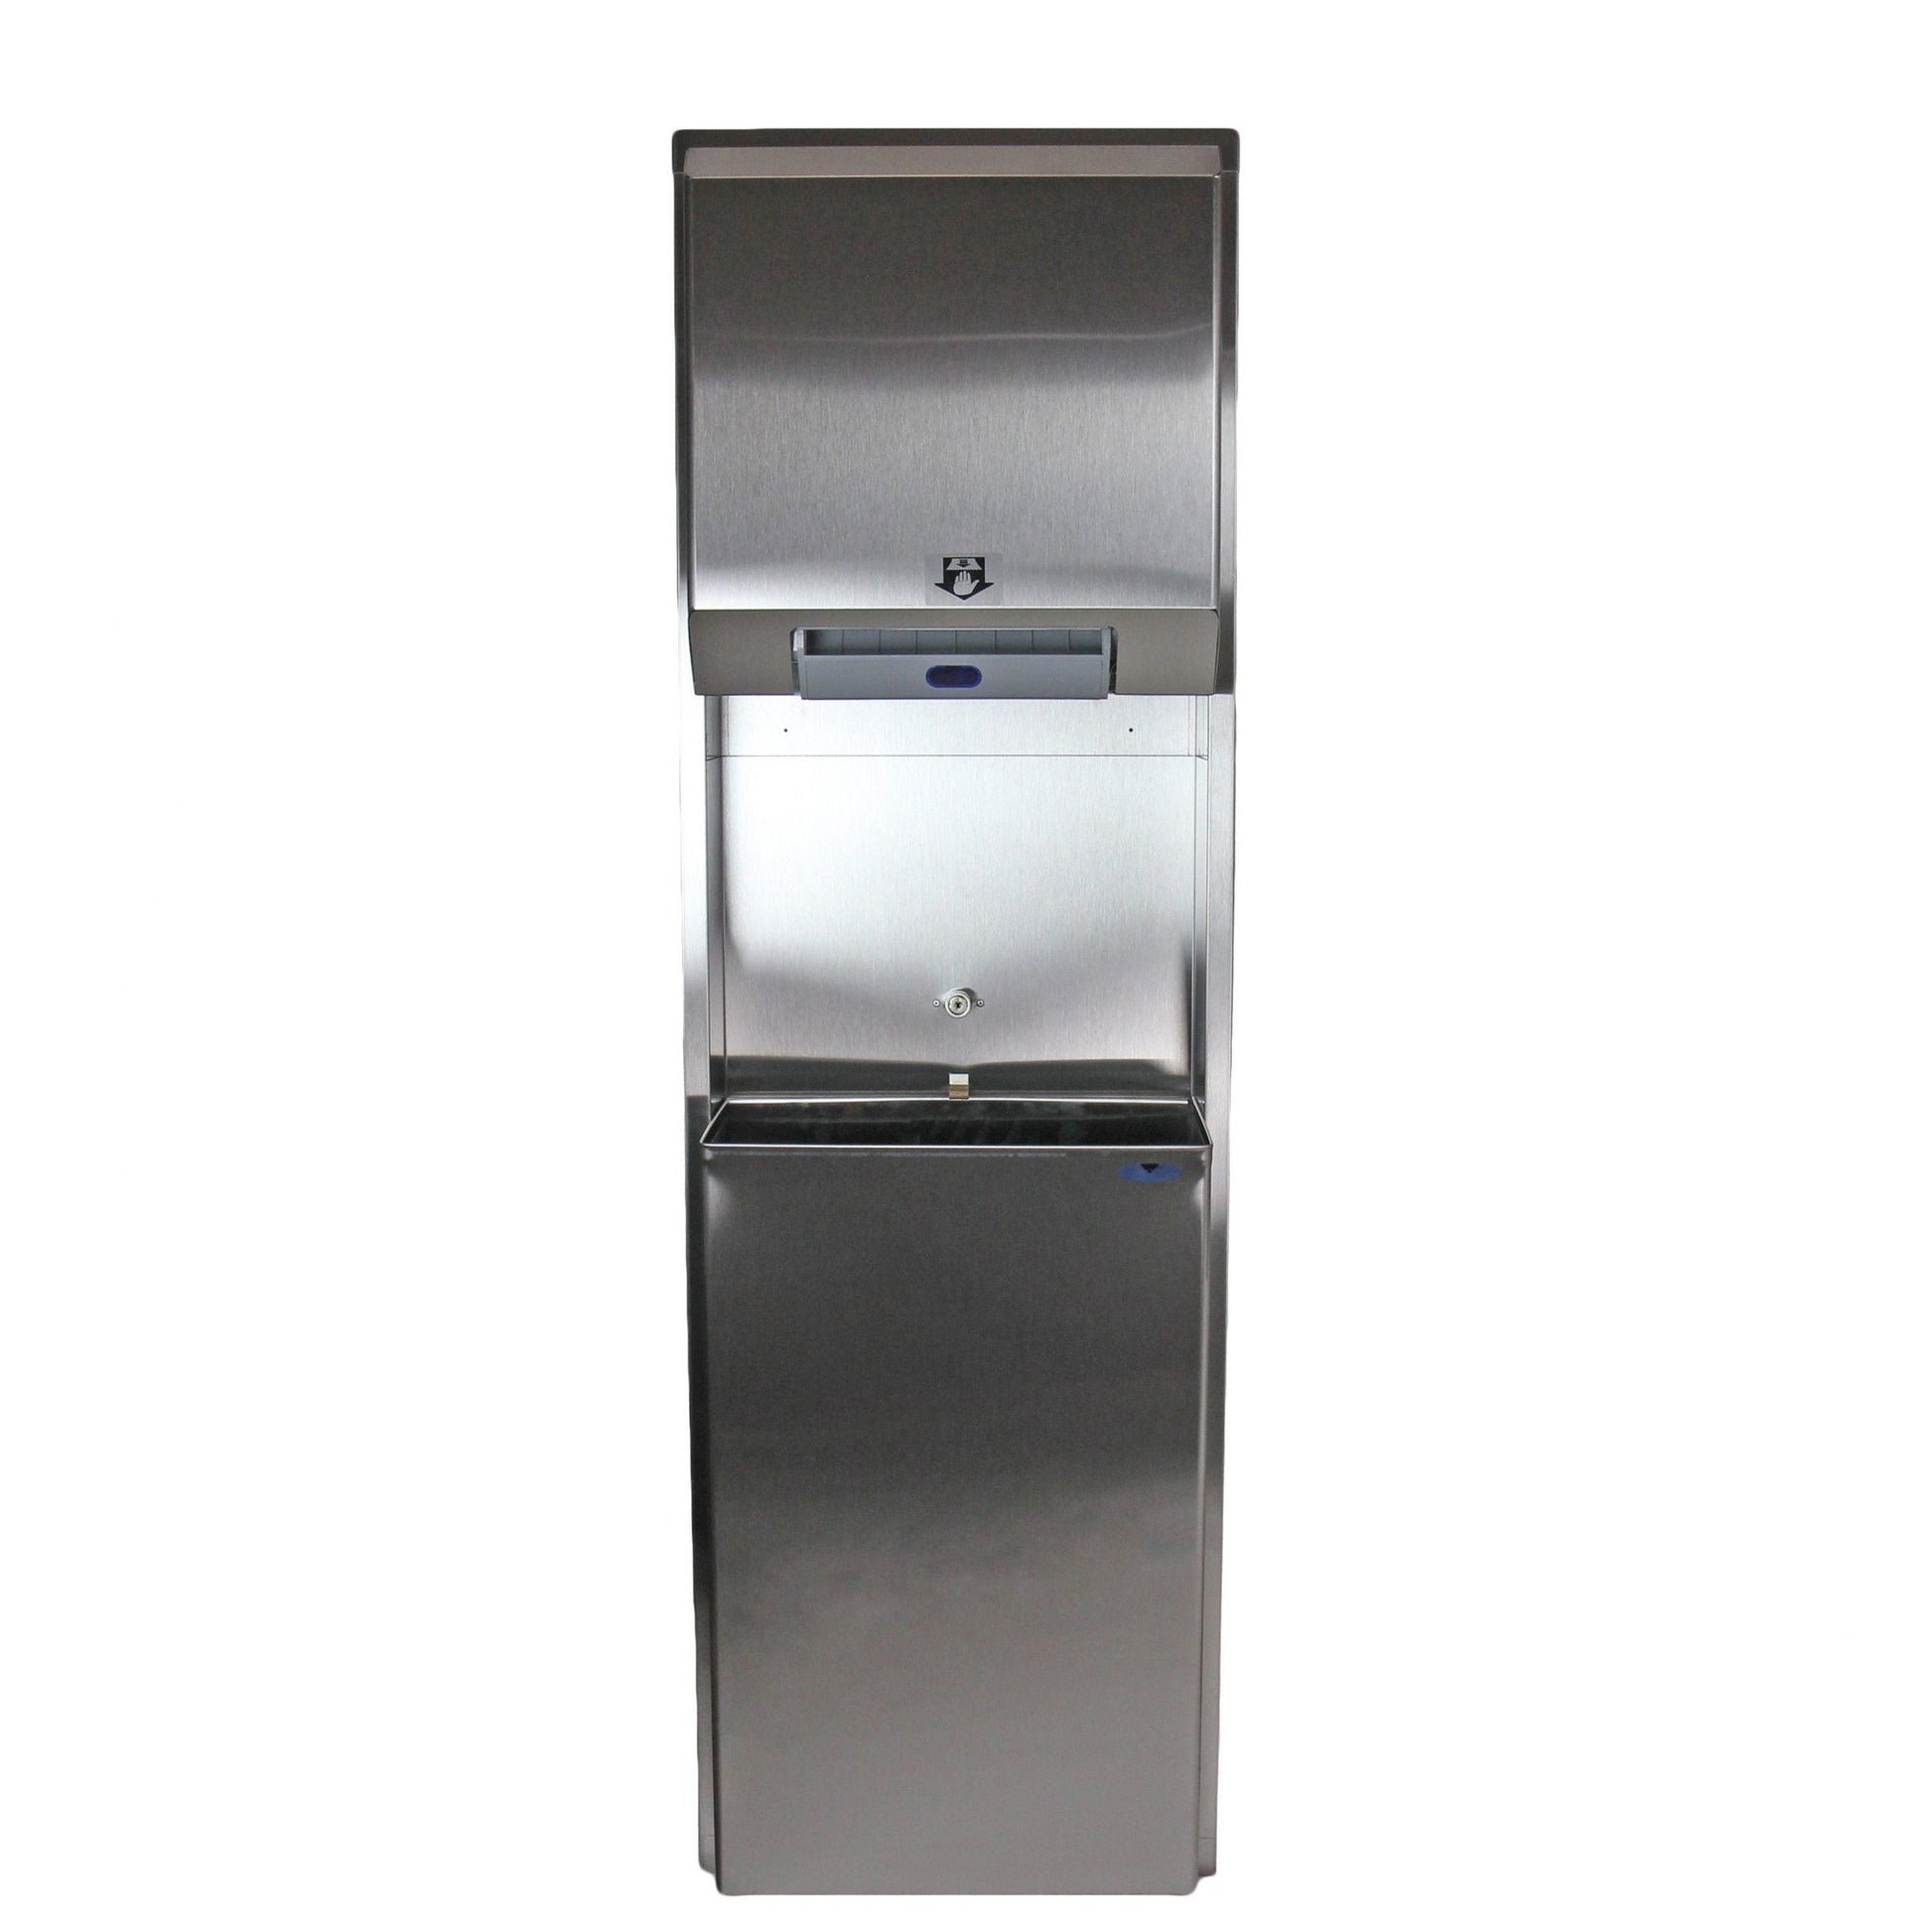 Frost 422-70A Recessed Automatic Stainless Steel Paper Dispensers and Disposals